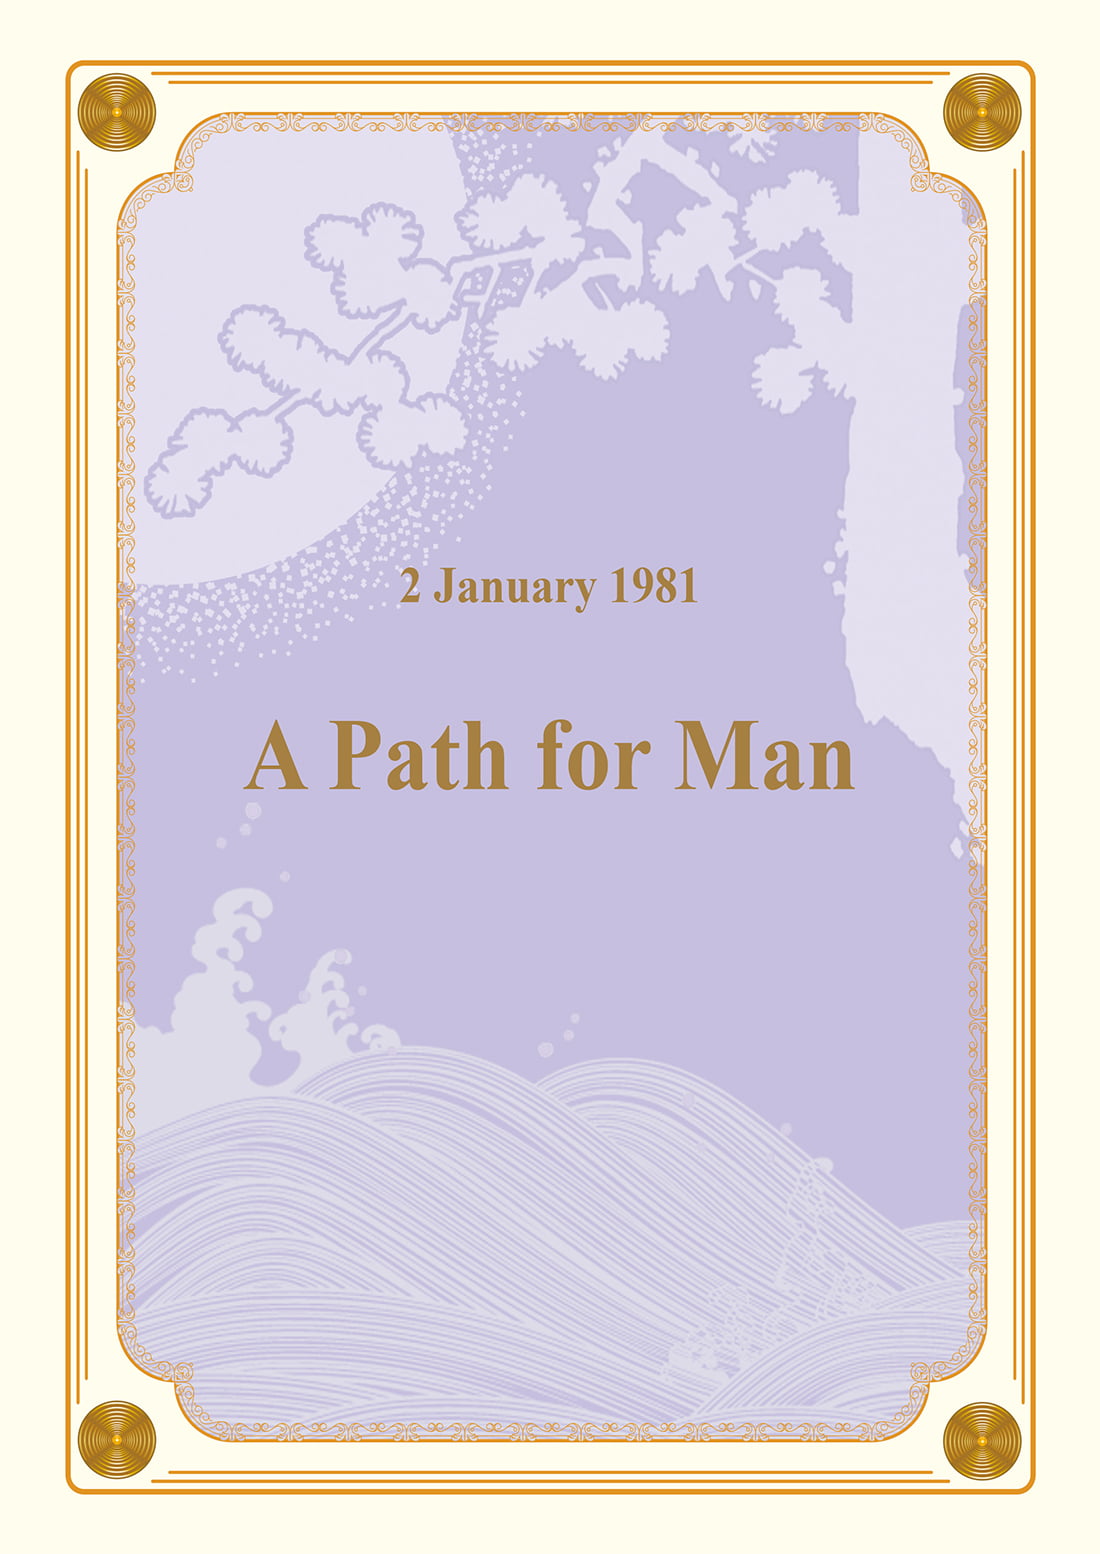 A Path for Man